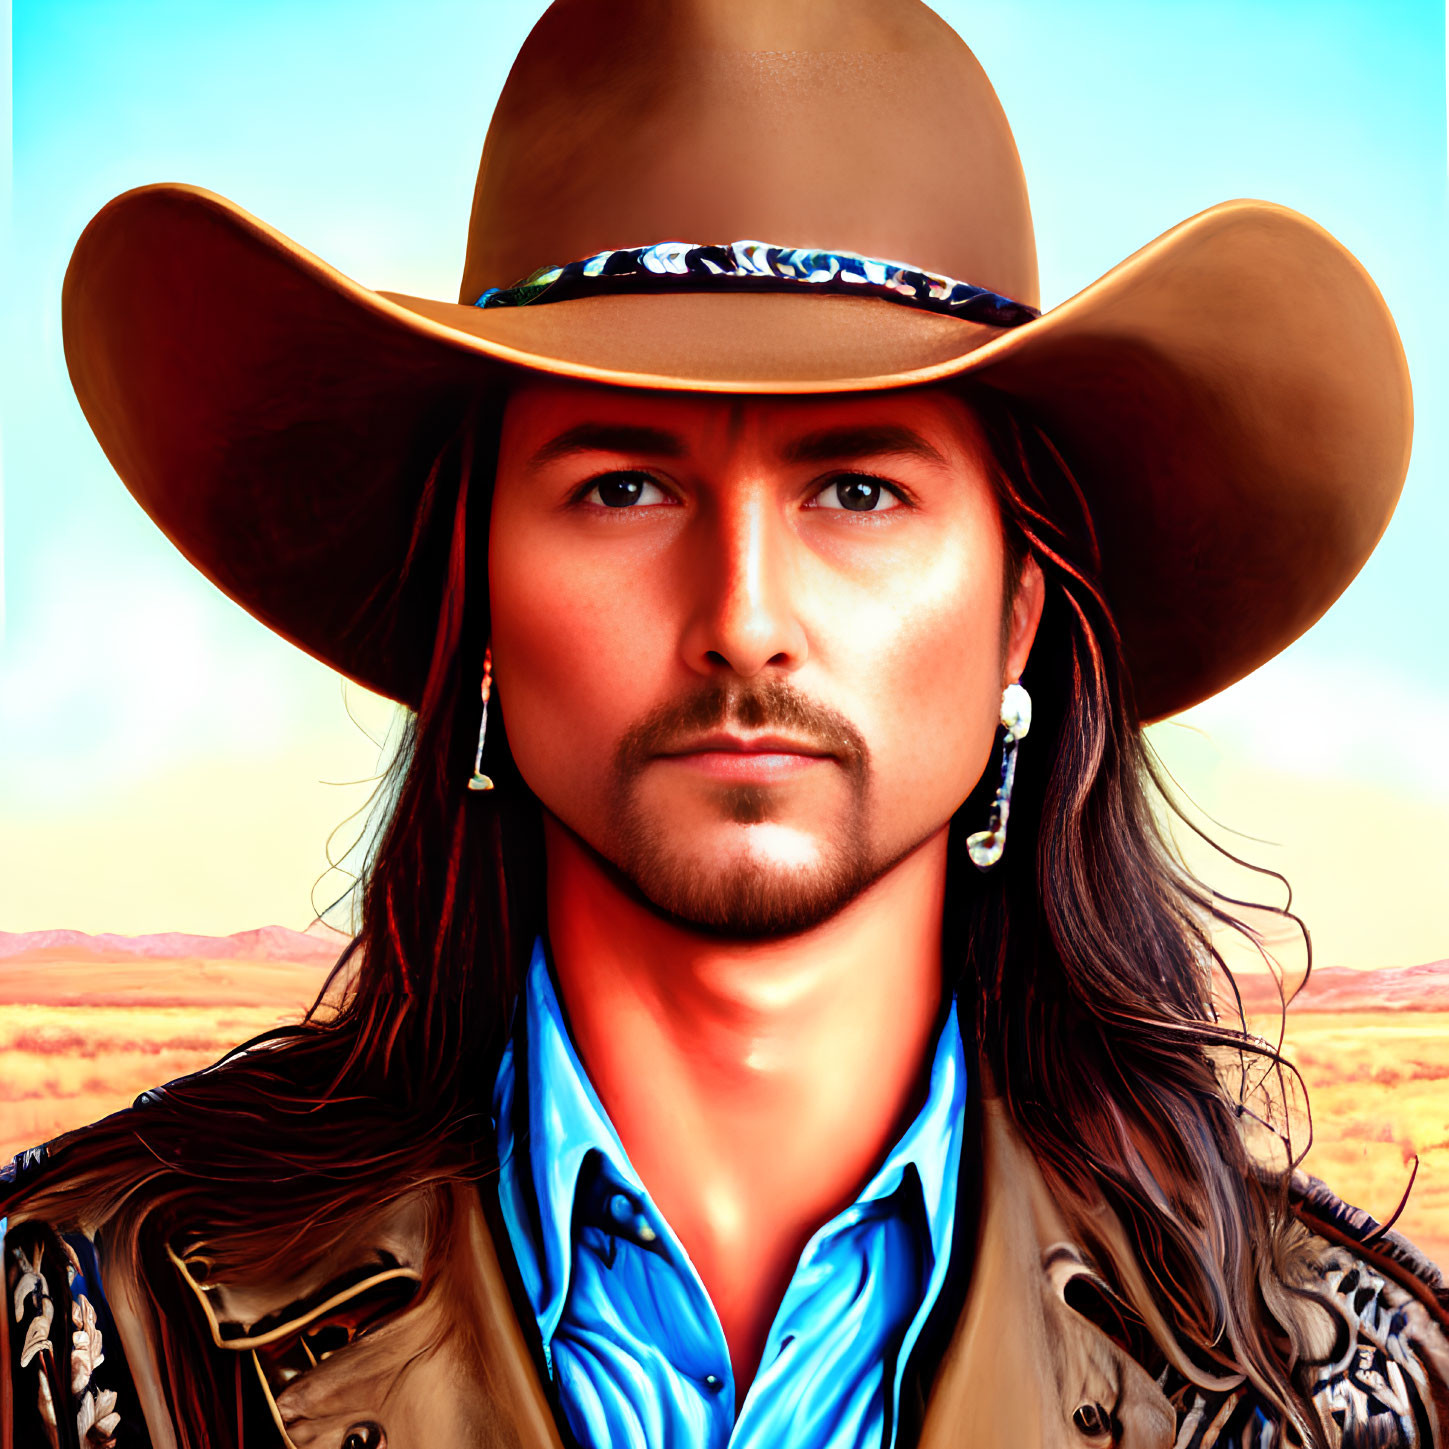 Man with Mustache in Cowboy Hat & Leather Jacket Portrait